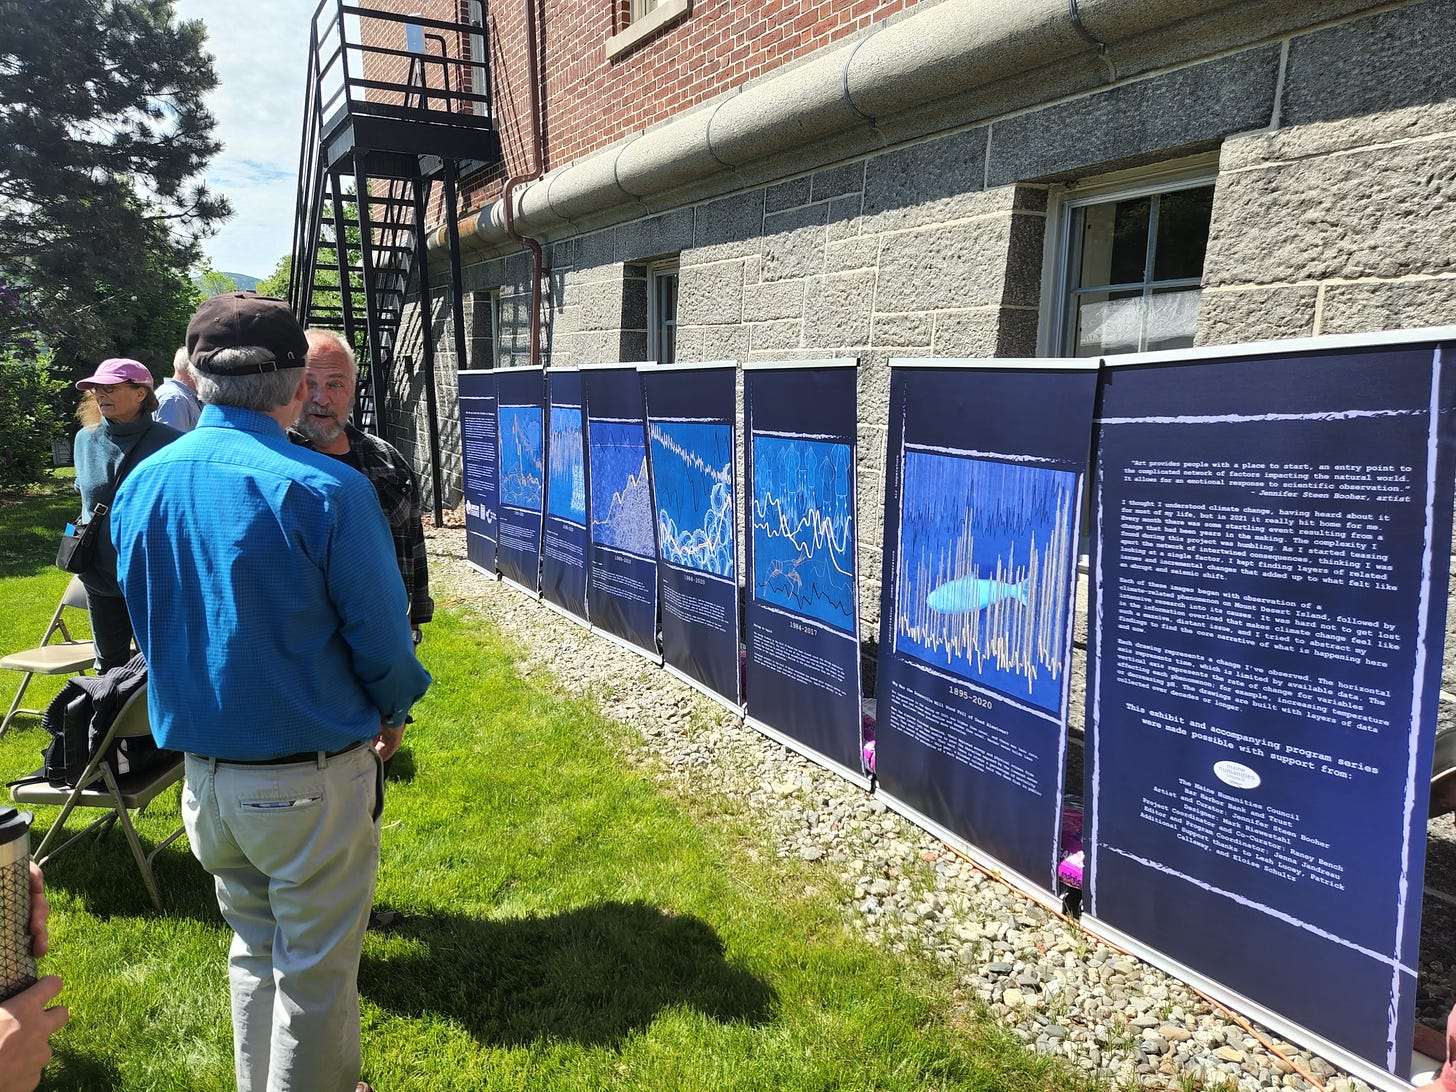 Eight large blue interpretive panels are lined up outdoors against the wall of a brick and granite block building. The panels show artwork incorporating data graphs. Four people are standing and talking nearby.